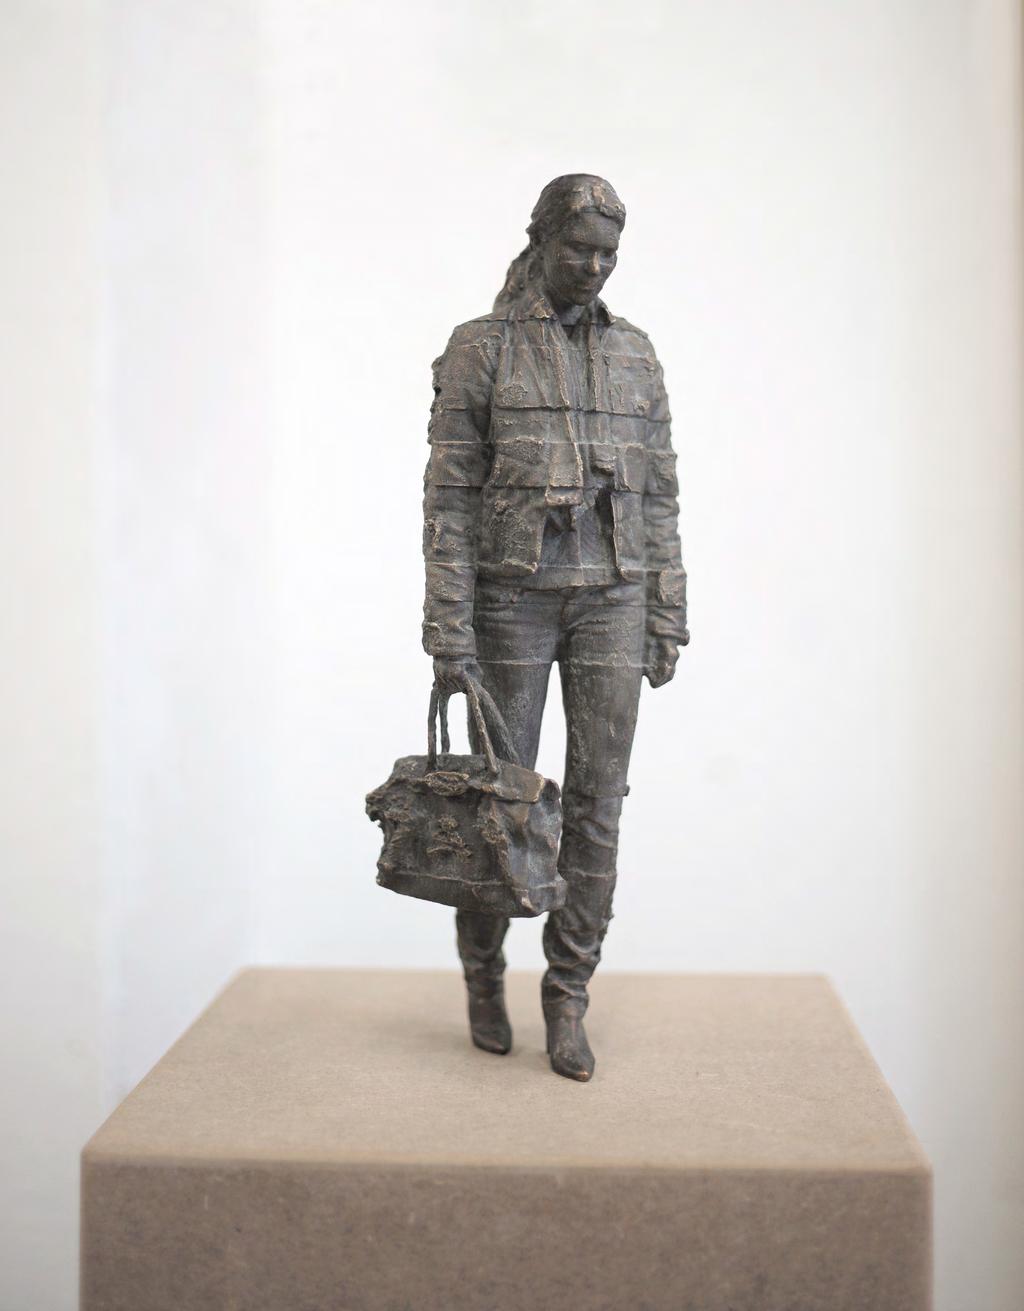 37 Walking Woman with Bag and Scarf, 2014 Bronze, edition of 6 + 2 AP 37 x 10 x 6 cm - 14.6 x 3.